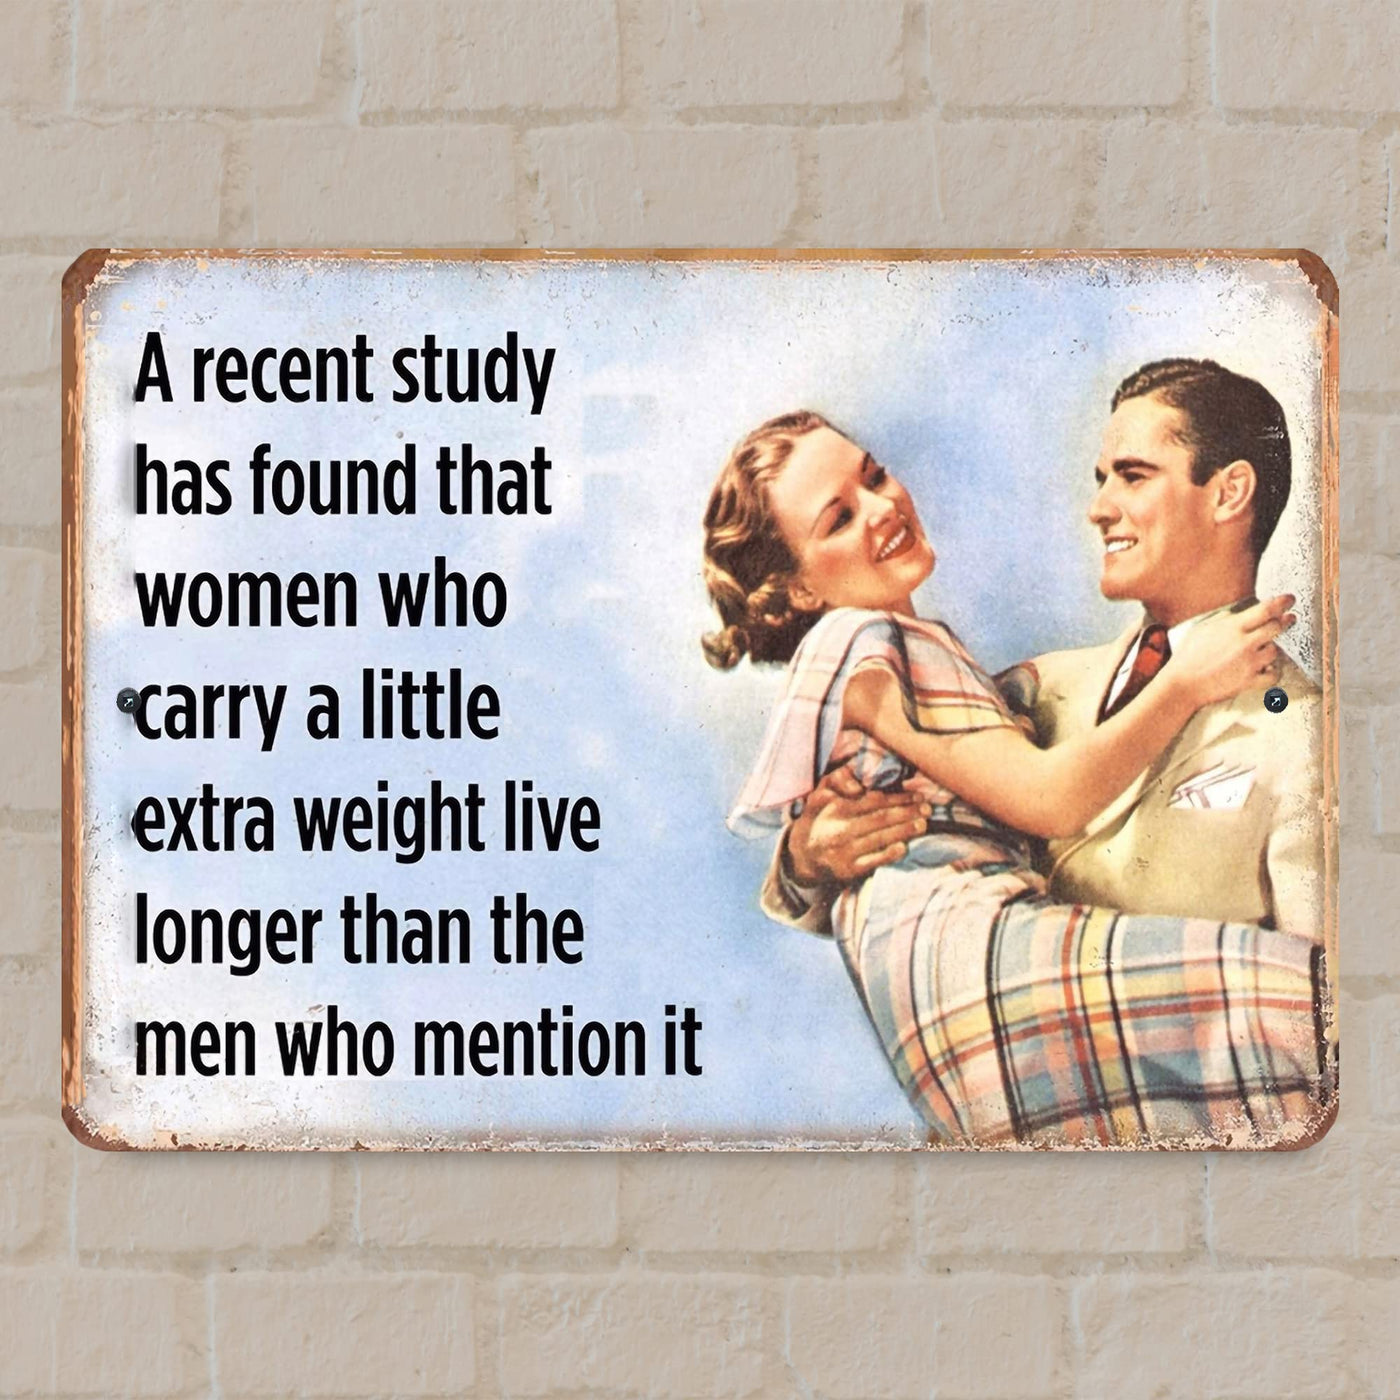 Women Who Carry Extra Weight Live Longer Metal Signs Vintage Wall Art -12x8"-Funny Rustic Sign -Home-Office-Patio Decor. Retro Tin Sign for Bar-Garage-Man Cave-Shop Decor & Fun Sarcastic Gifts!